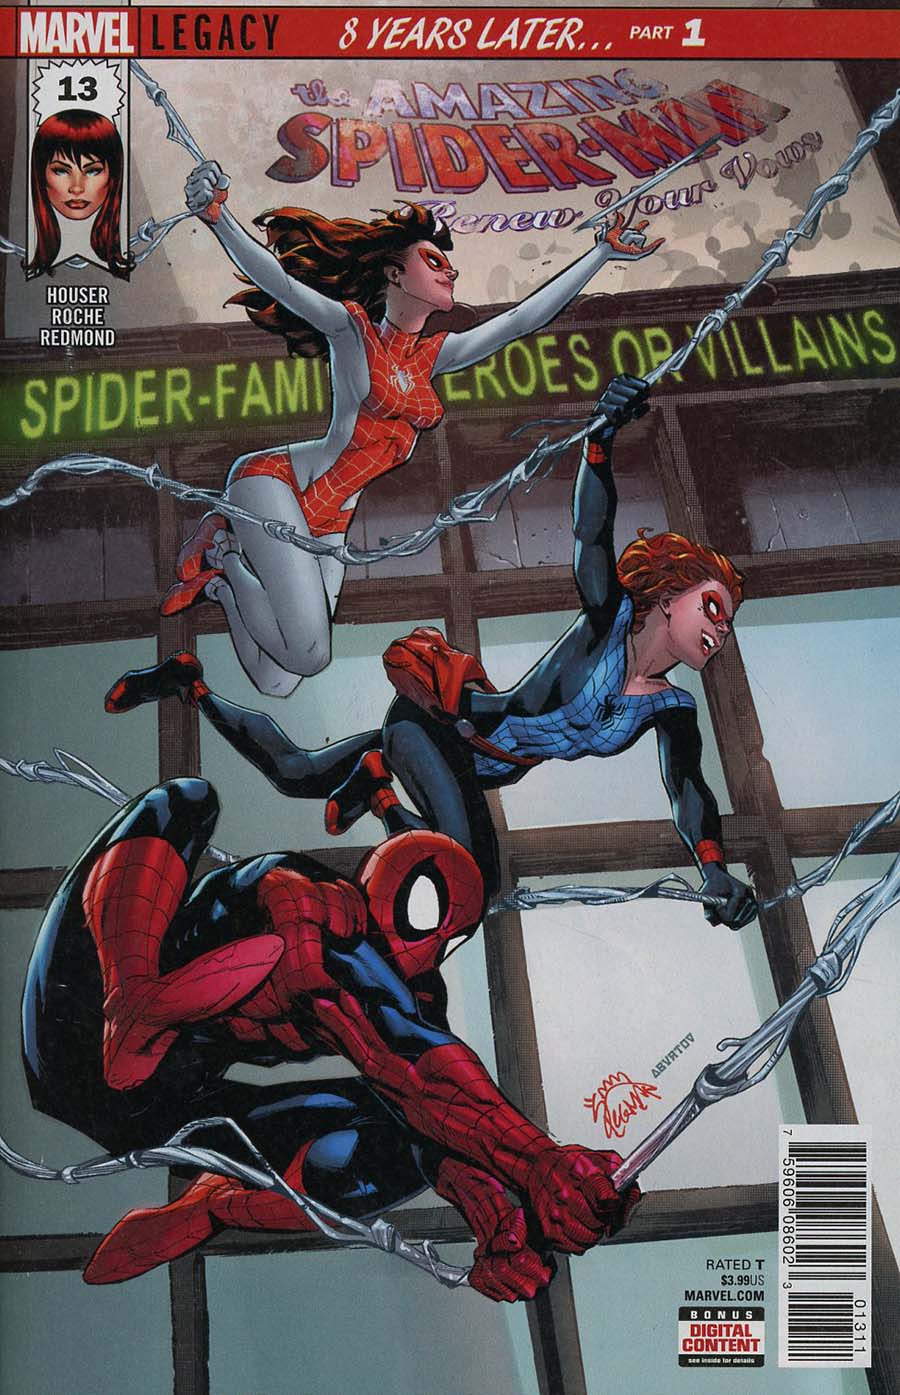 Amazing Spider-Man Renew Your Vows Vol 2 #13 Cover A Regular Ryan Stegman Cover (Marvel Legacy Tie-In)